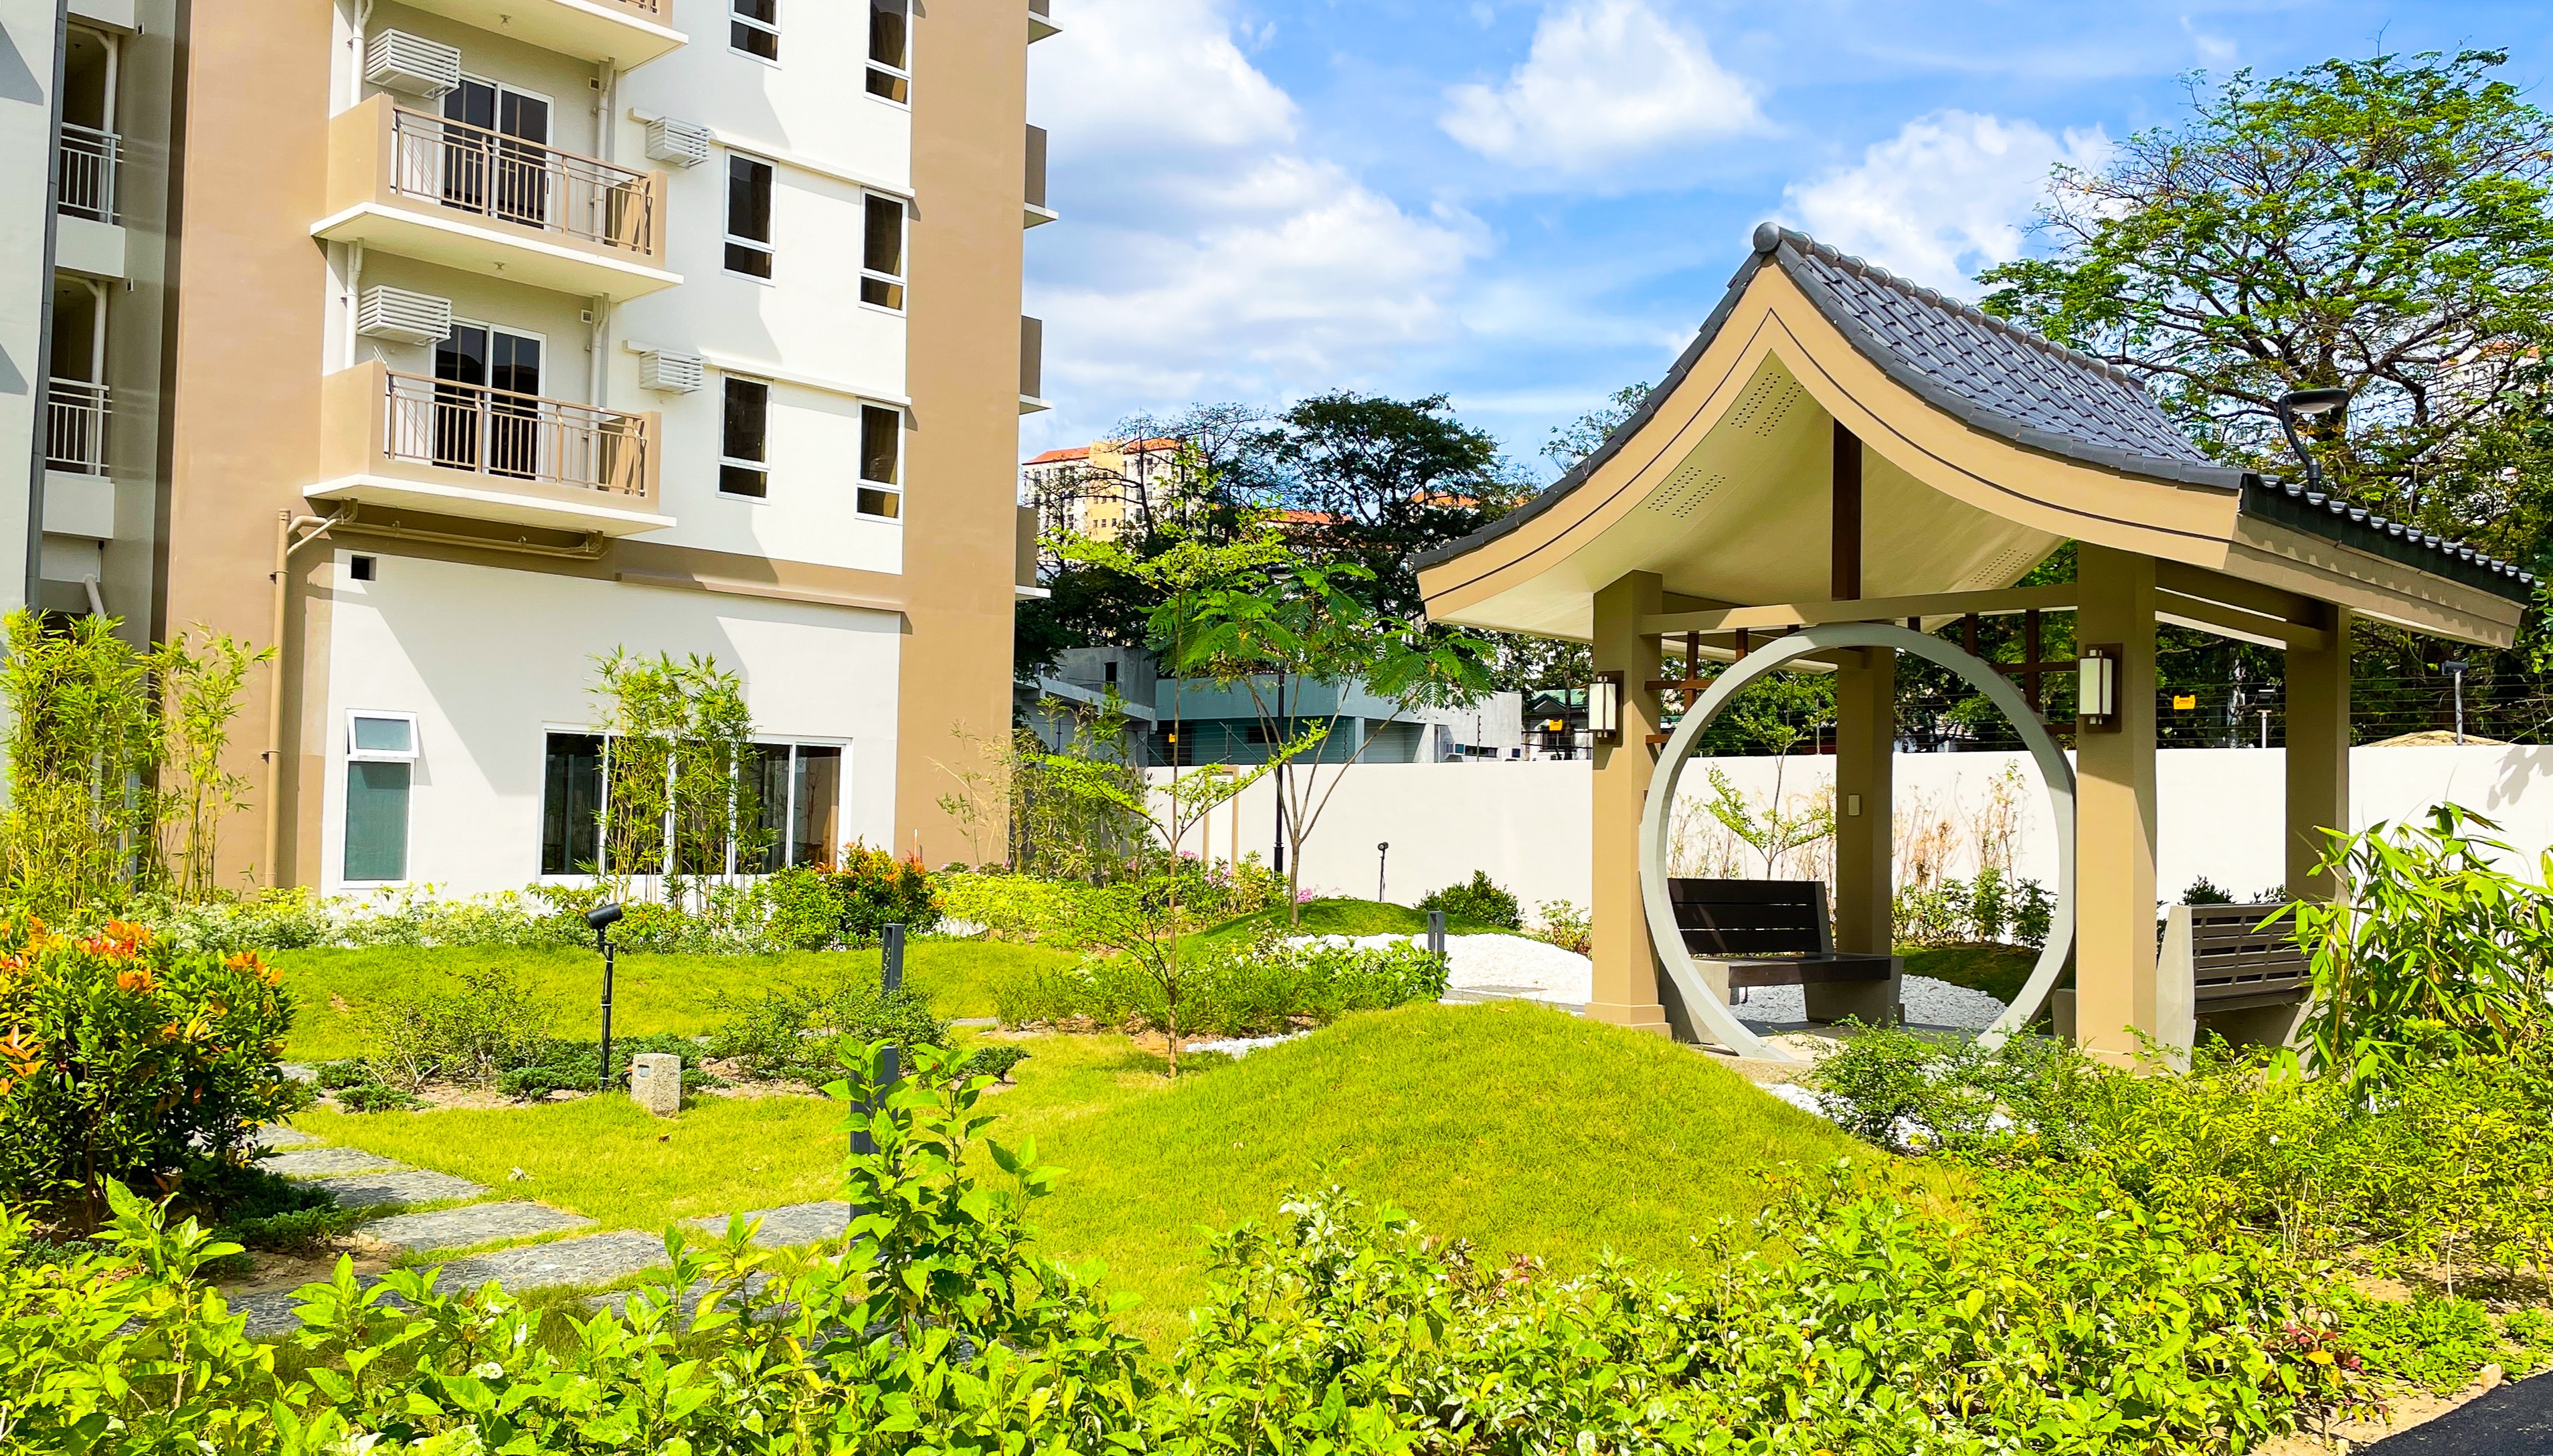 dmci-homes-first-japanese-architecture-inspired-condo-opened-to-residents-1675240027524